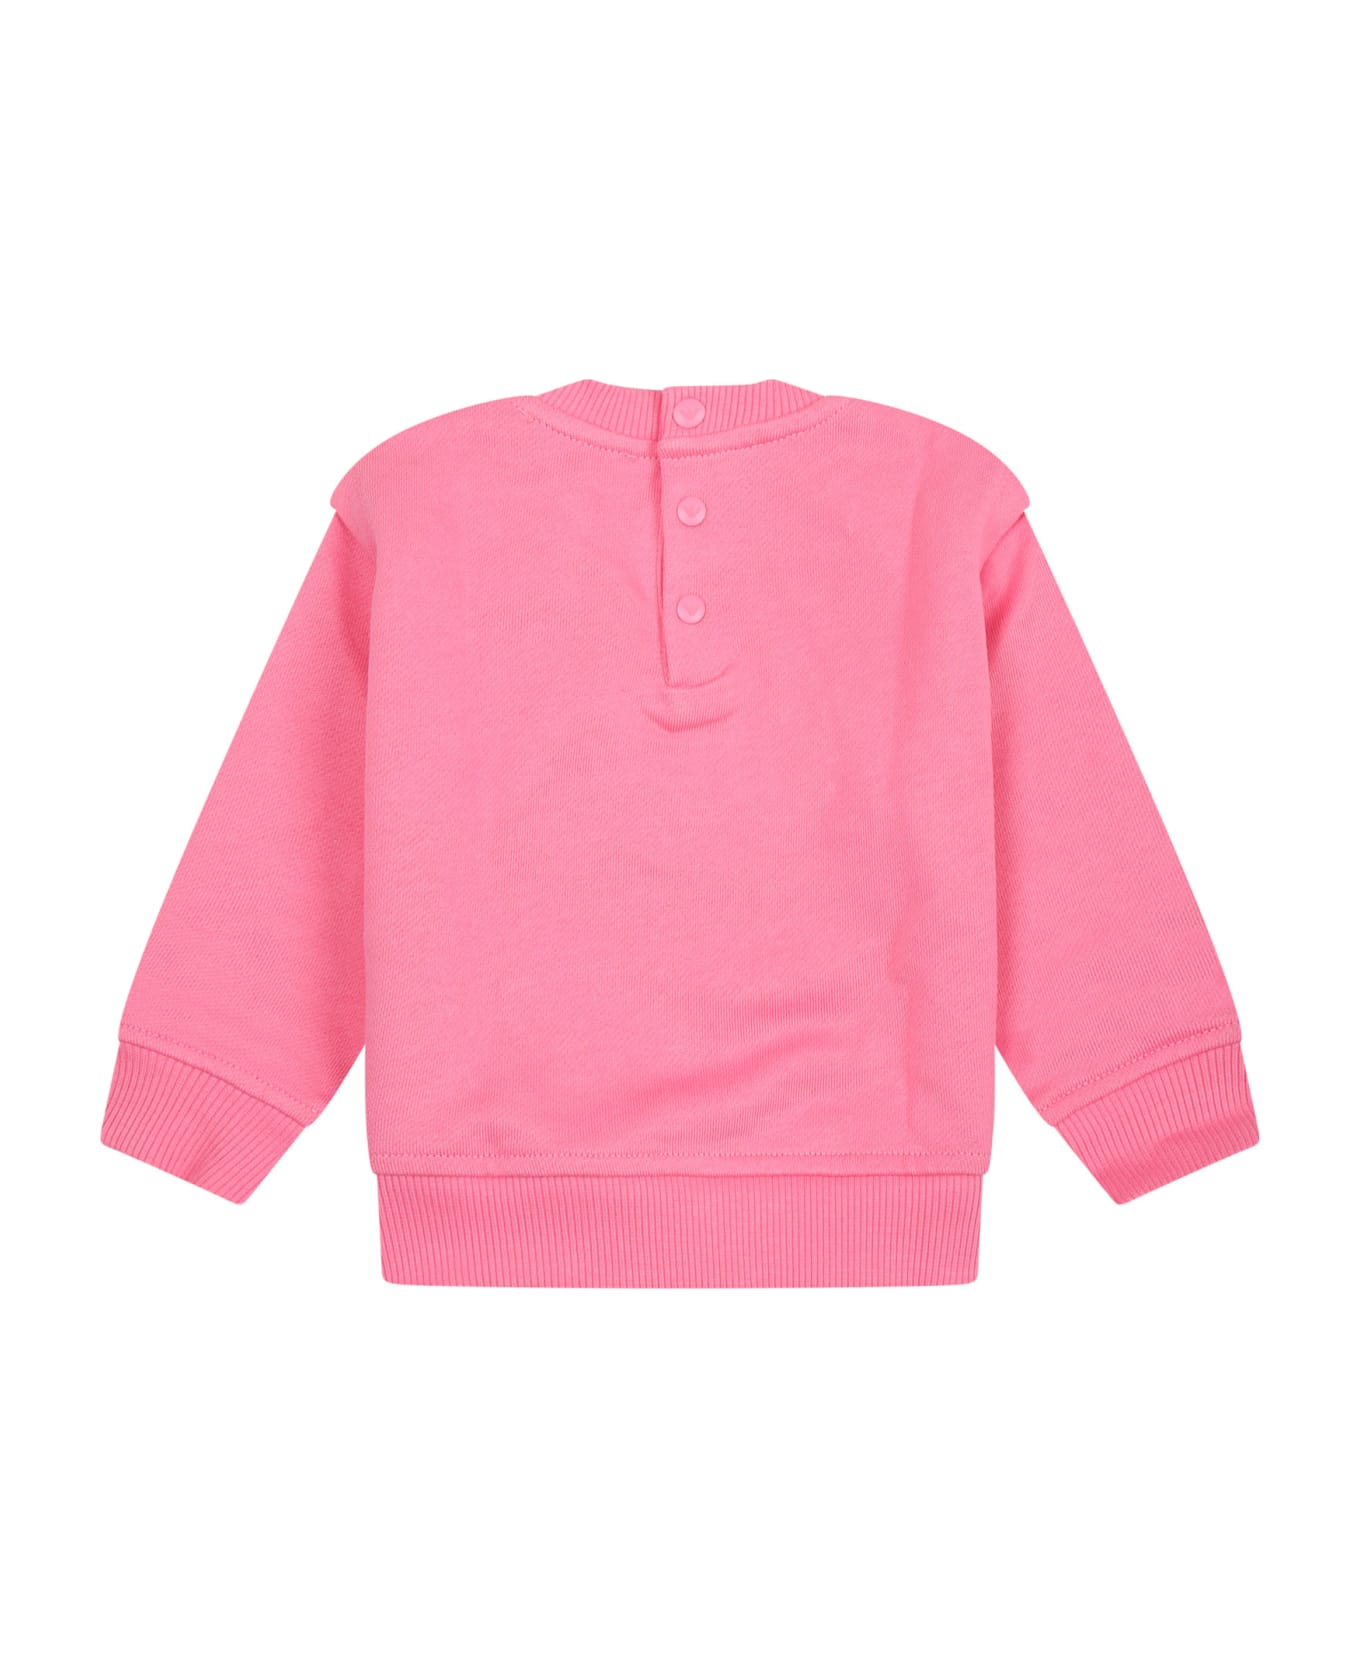 Emporio Armani Pink Sweatshirt For Baby Girl With The Smurfs - Pink